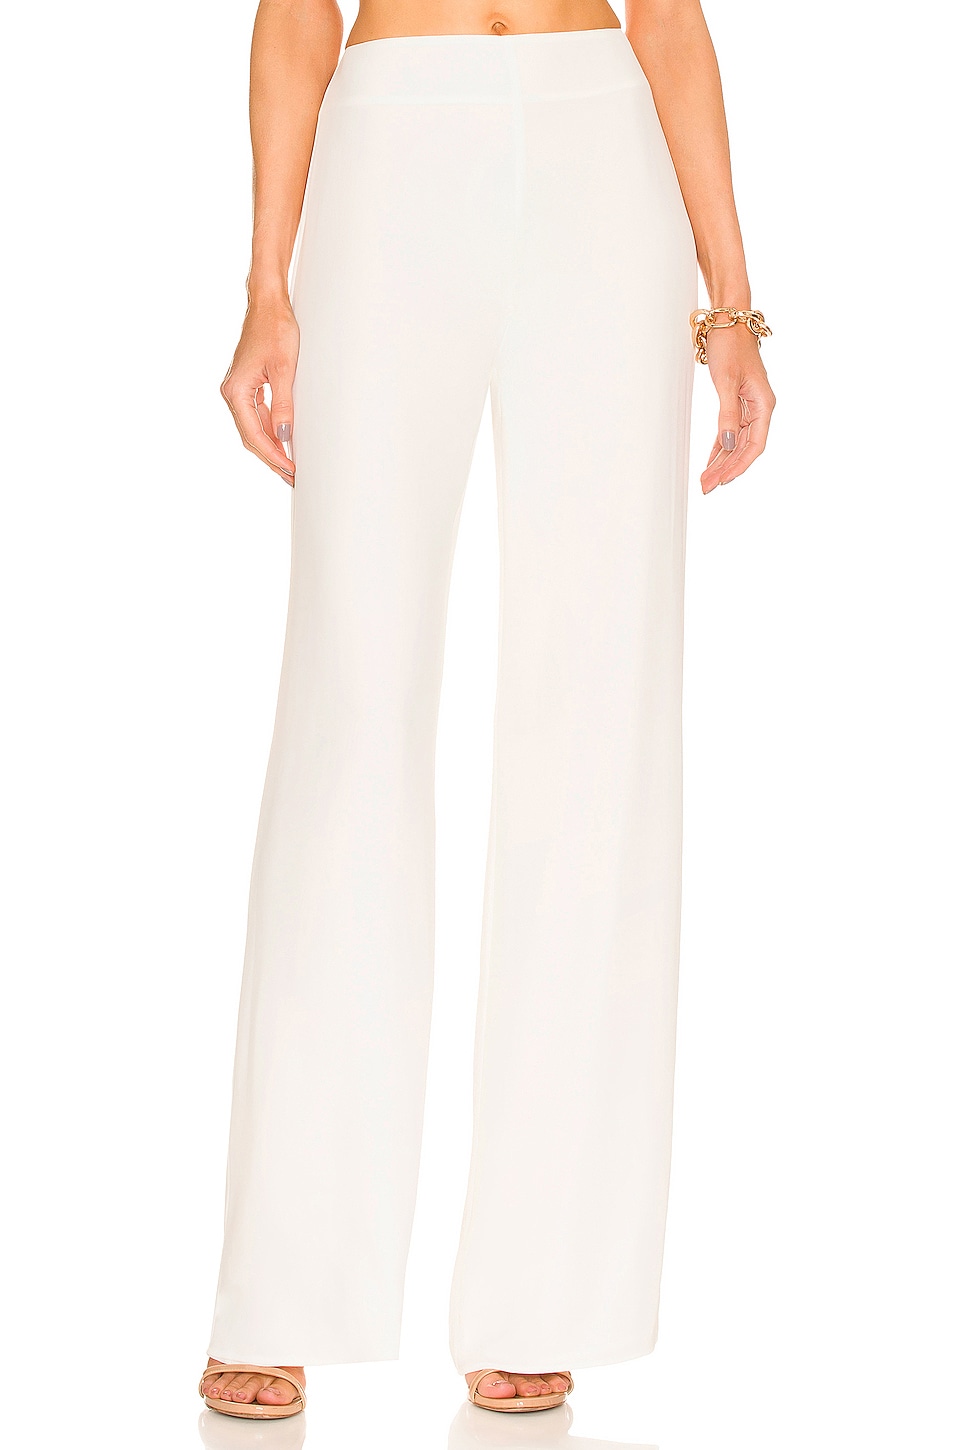 Alexis Quince Pants in Ivory | REVOLVE